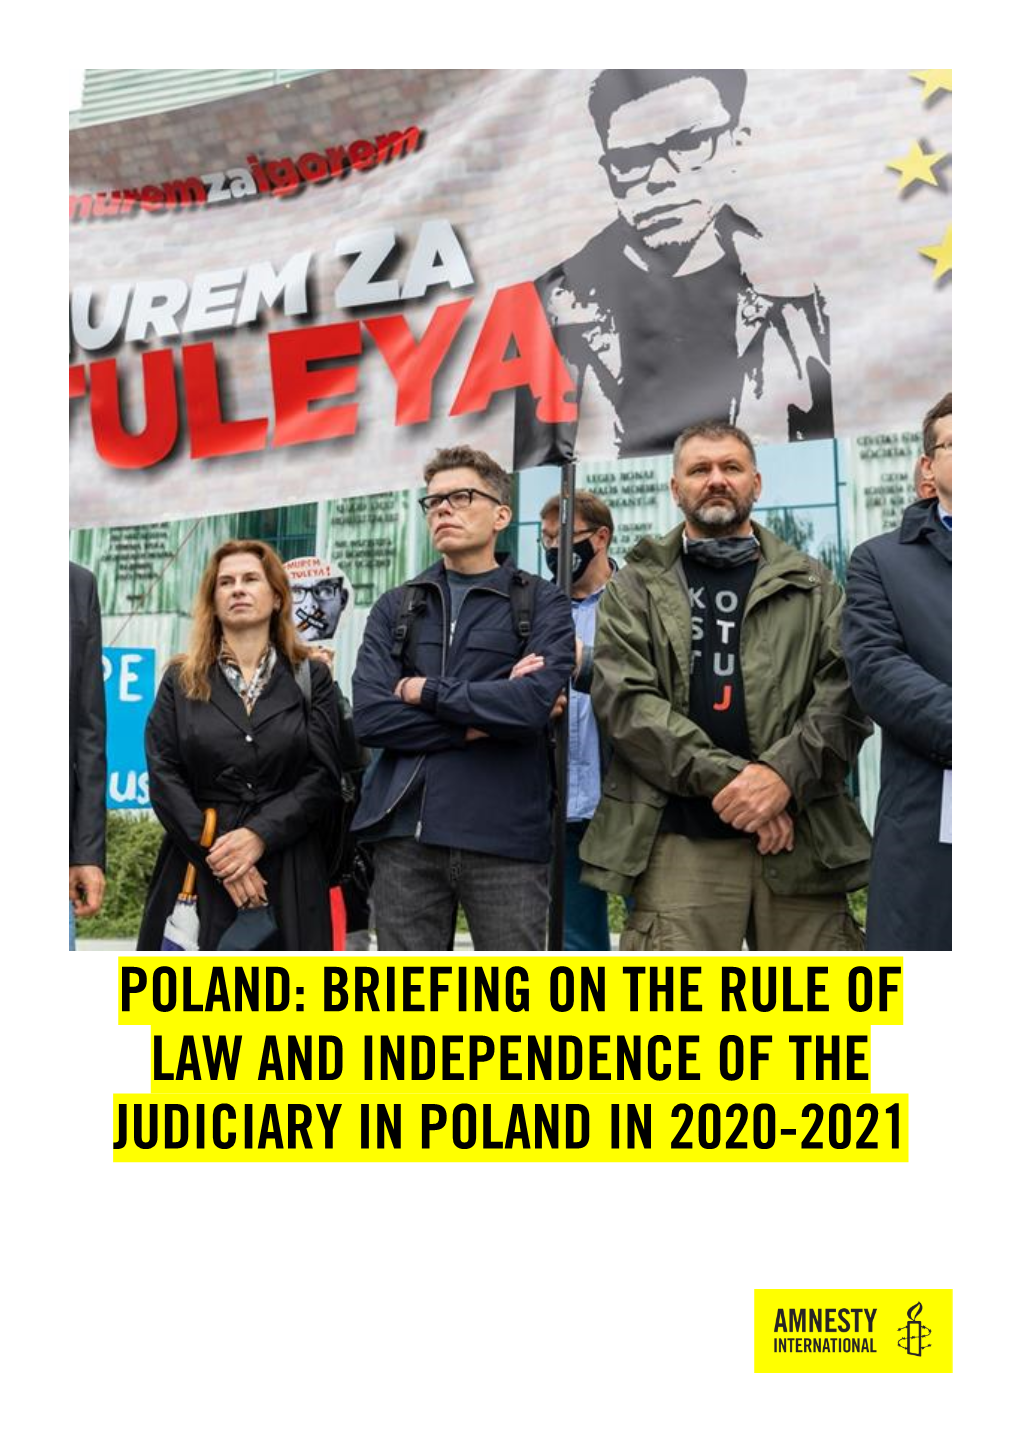 Poland: Briefing on the Rule of Law and Independence of the Judiciary in Poland in 2020-2021